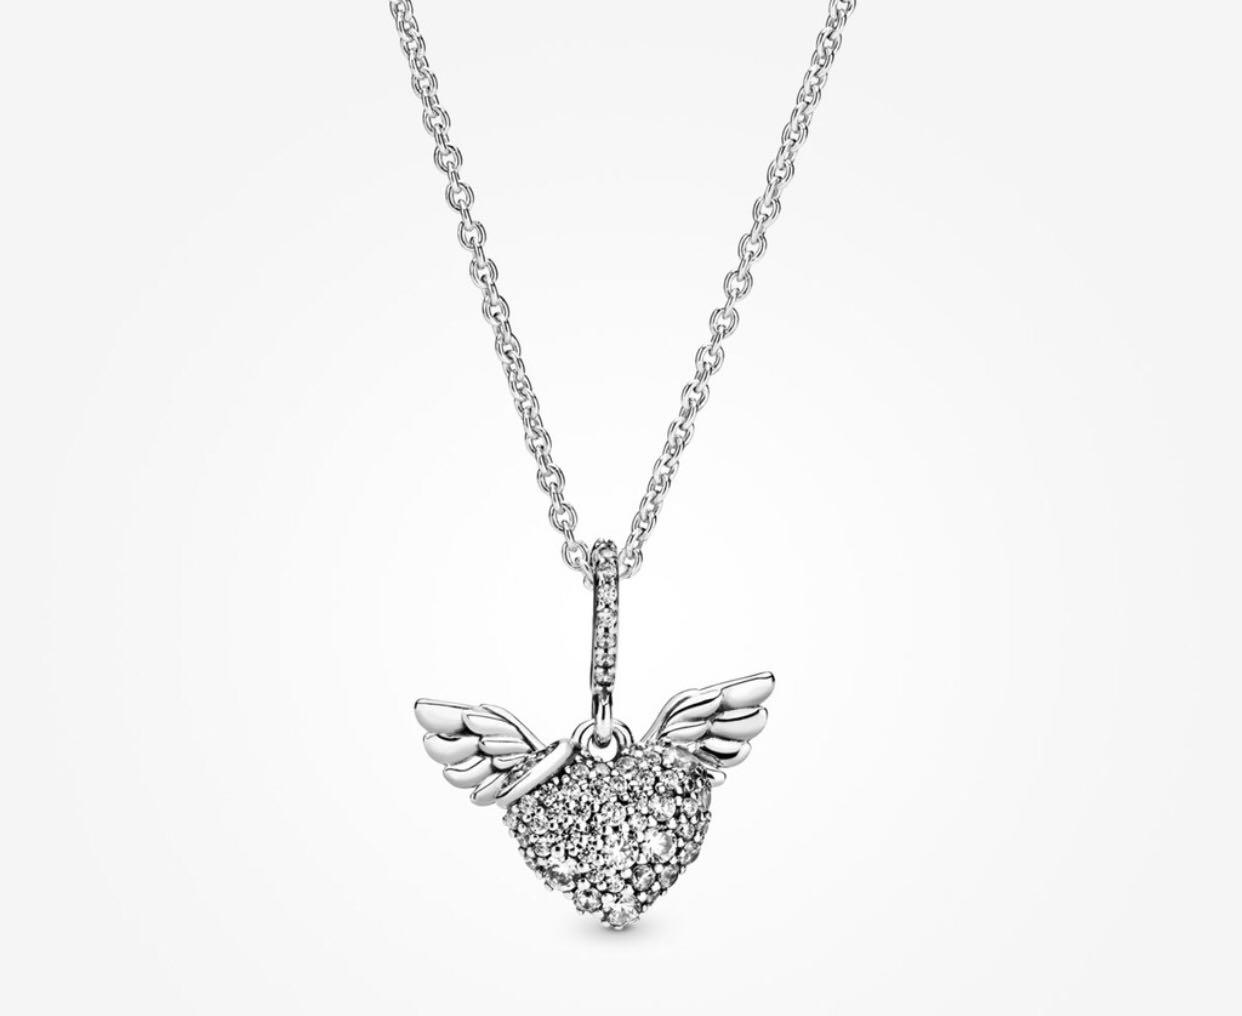 DYXIA 925 Wings Silver Heart Guardian Significado charme pendente